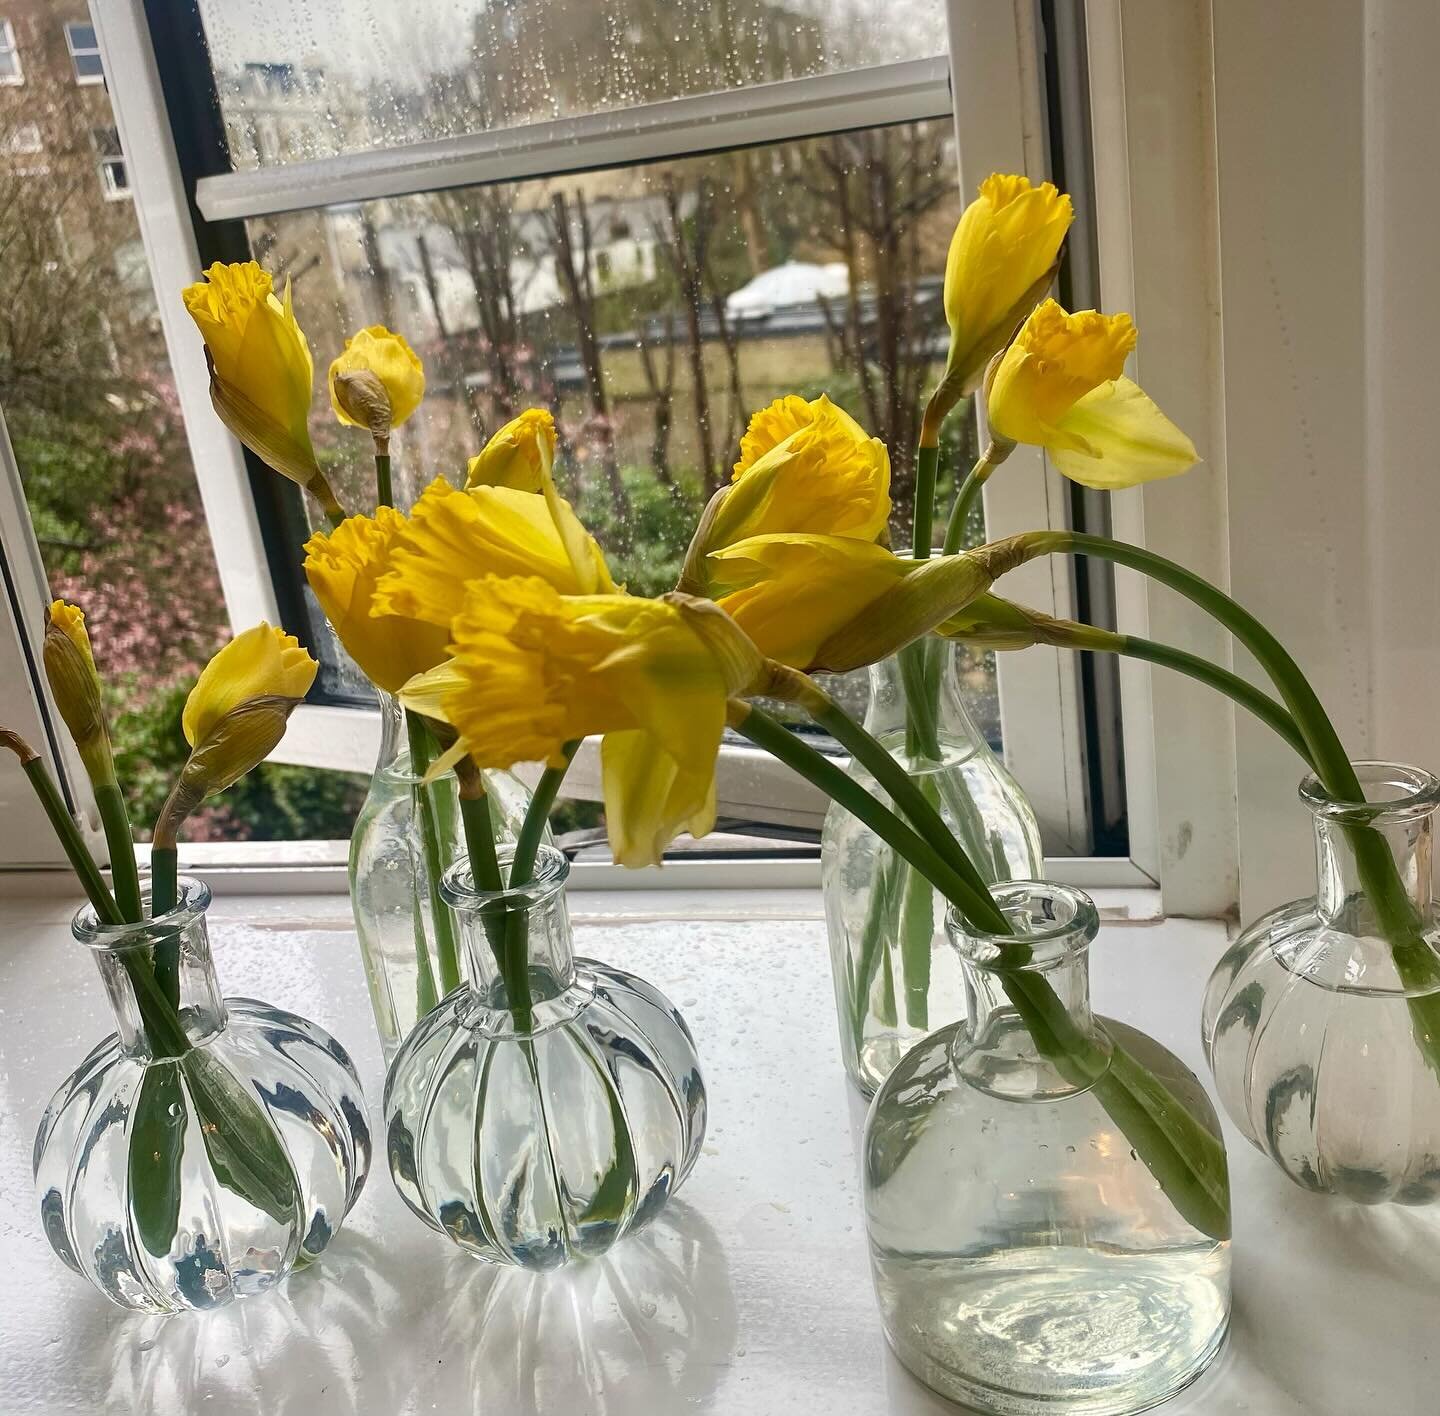 Me and my daffies. It&rsquo;s been raining for chapters on grey skies, but these shots of yellow pierce the dull morning. 

Brolly, boots and &lsquo;The History of London in Four Drinks&rsquo; - cosy pubs on order. 

Saturday vibes &hellip;

.
.
.

#